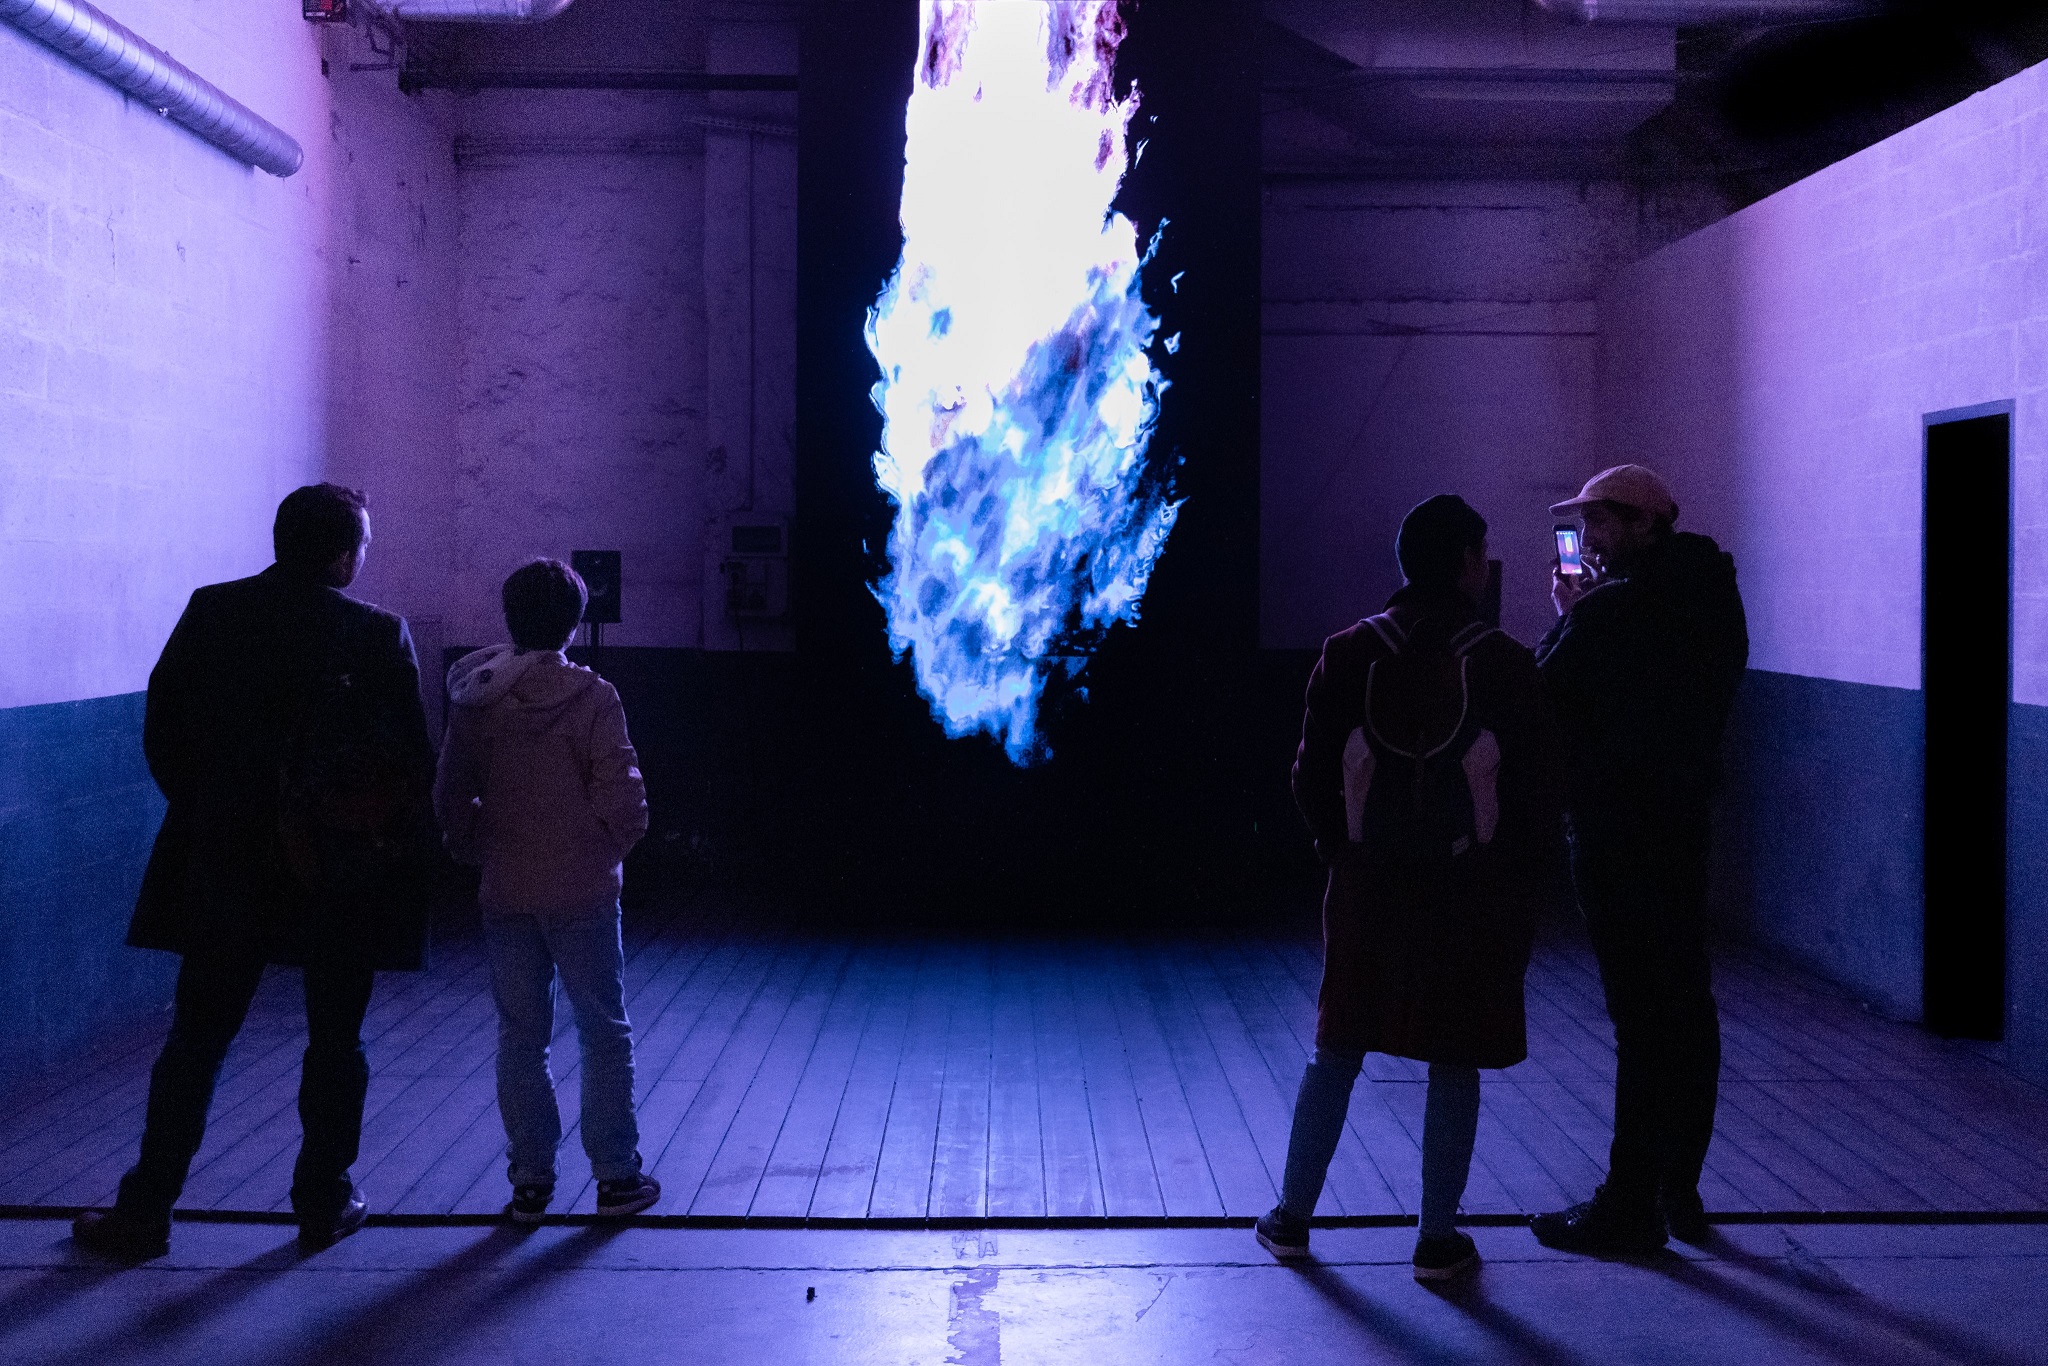 A group of people stand in front of a  intense, large blue flame on a floor length black screen